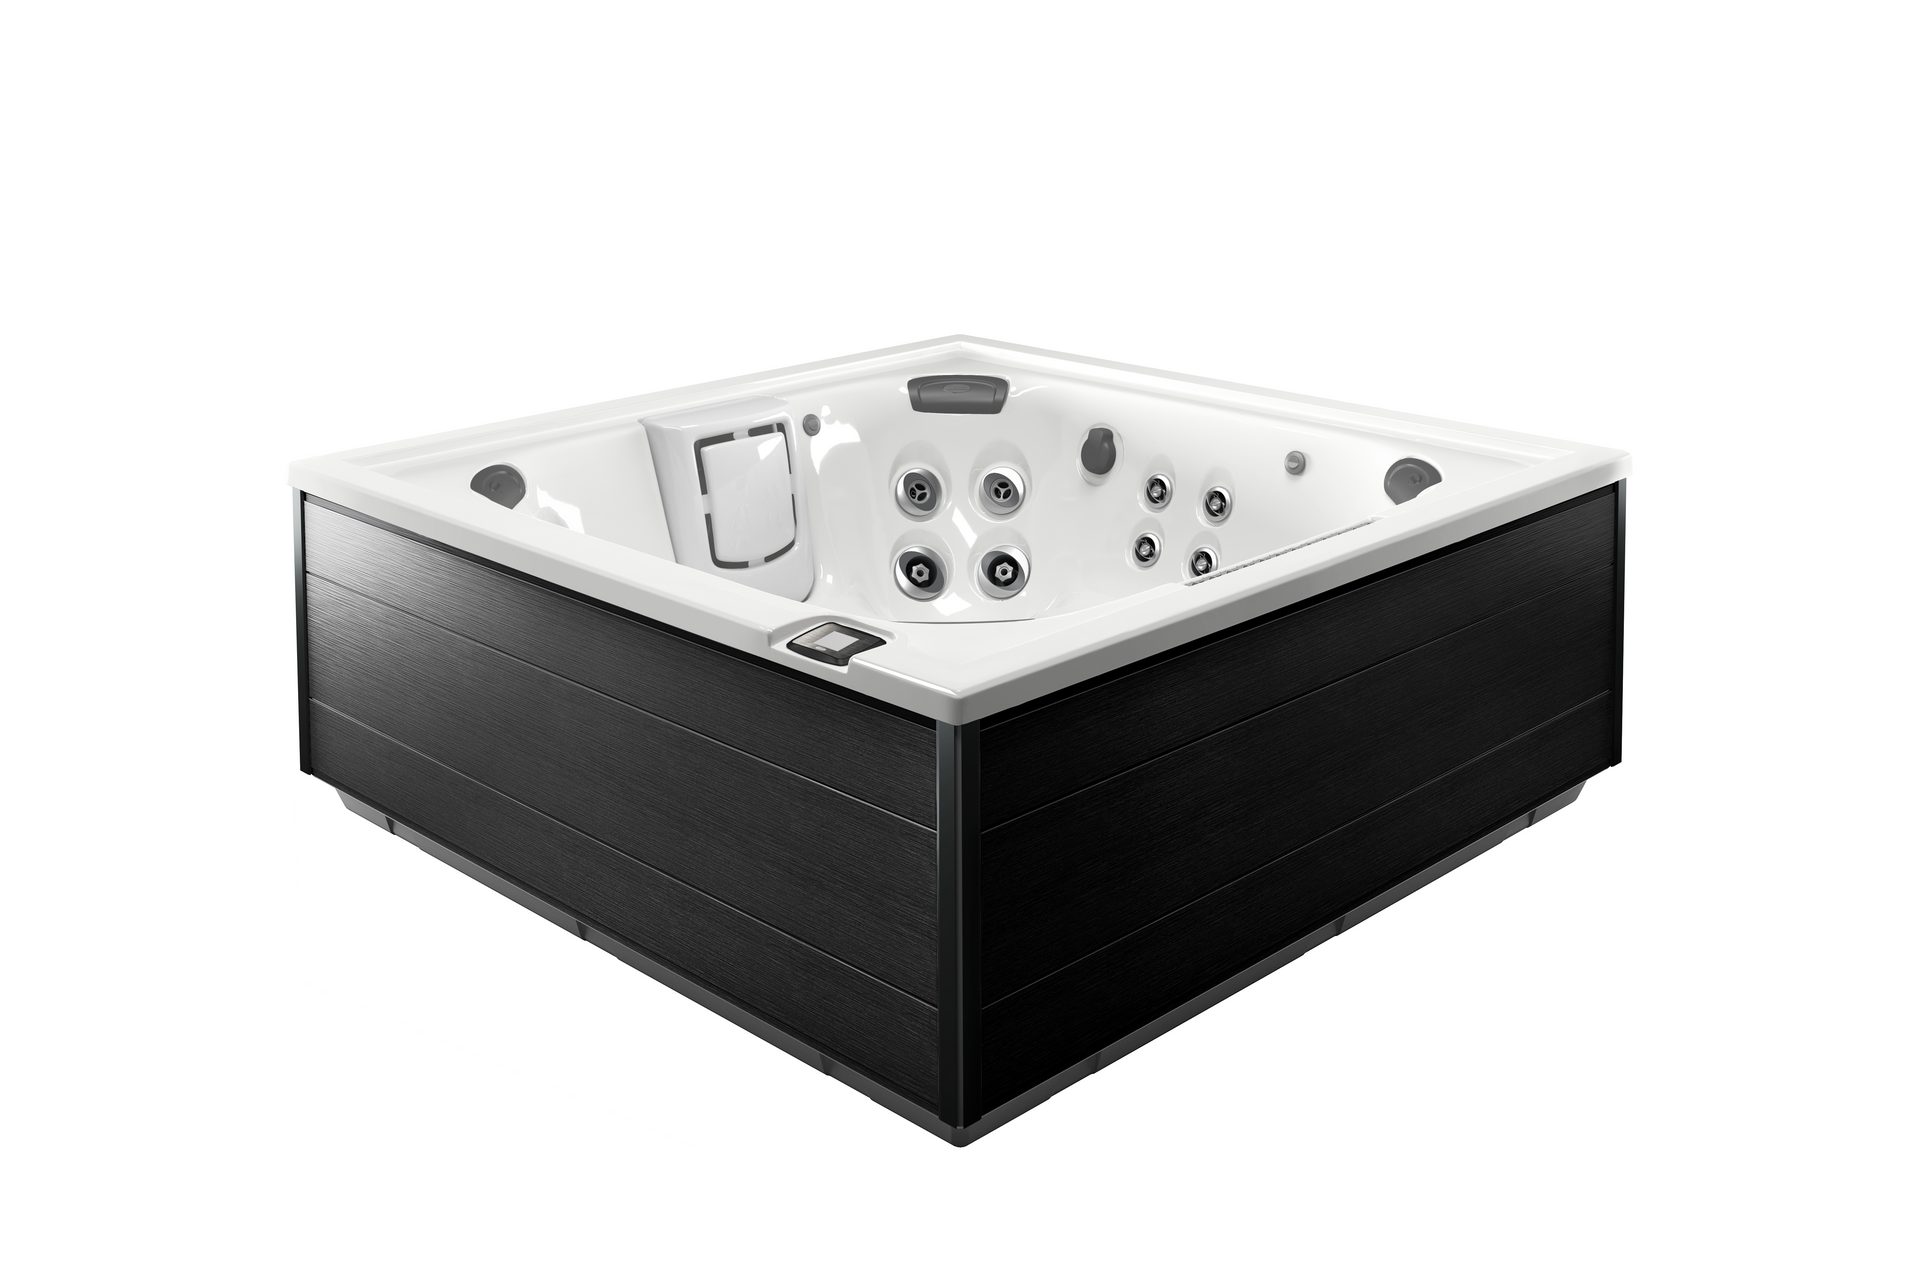 View The Brand New Hot Tub, The J-LX By Jacuzzi